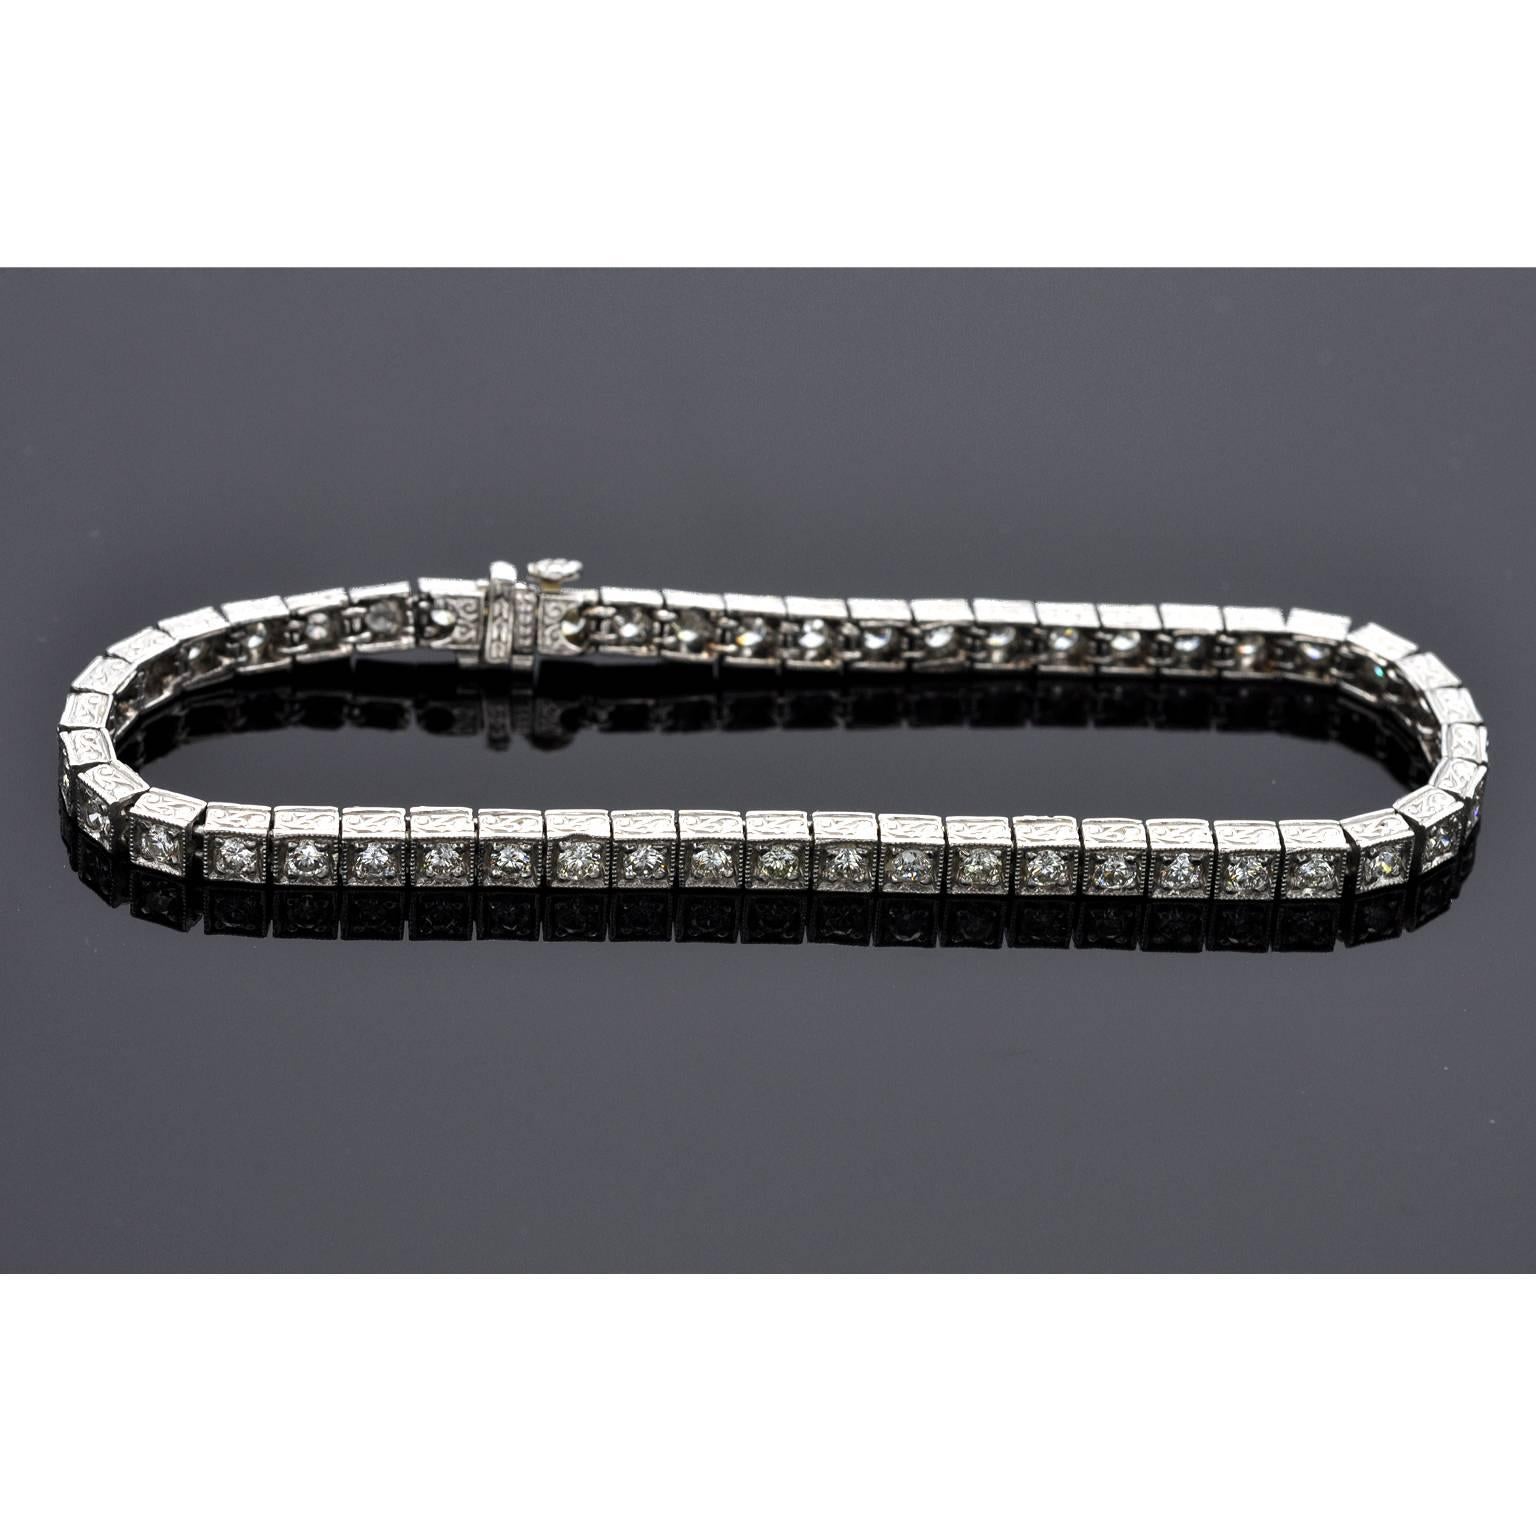 Art Deco Line Bracelet, Finely crafted in platinum set with 49 brilliant cut diamonds approx. 3.5 carats, H-I color, VS1-SI1 clarity, Beautiful Hand work detailed with milgrain borders and engraved sides.  it has an engraved insert clasp with hidden